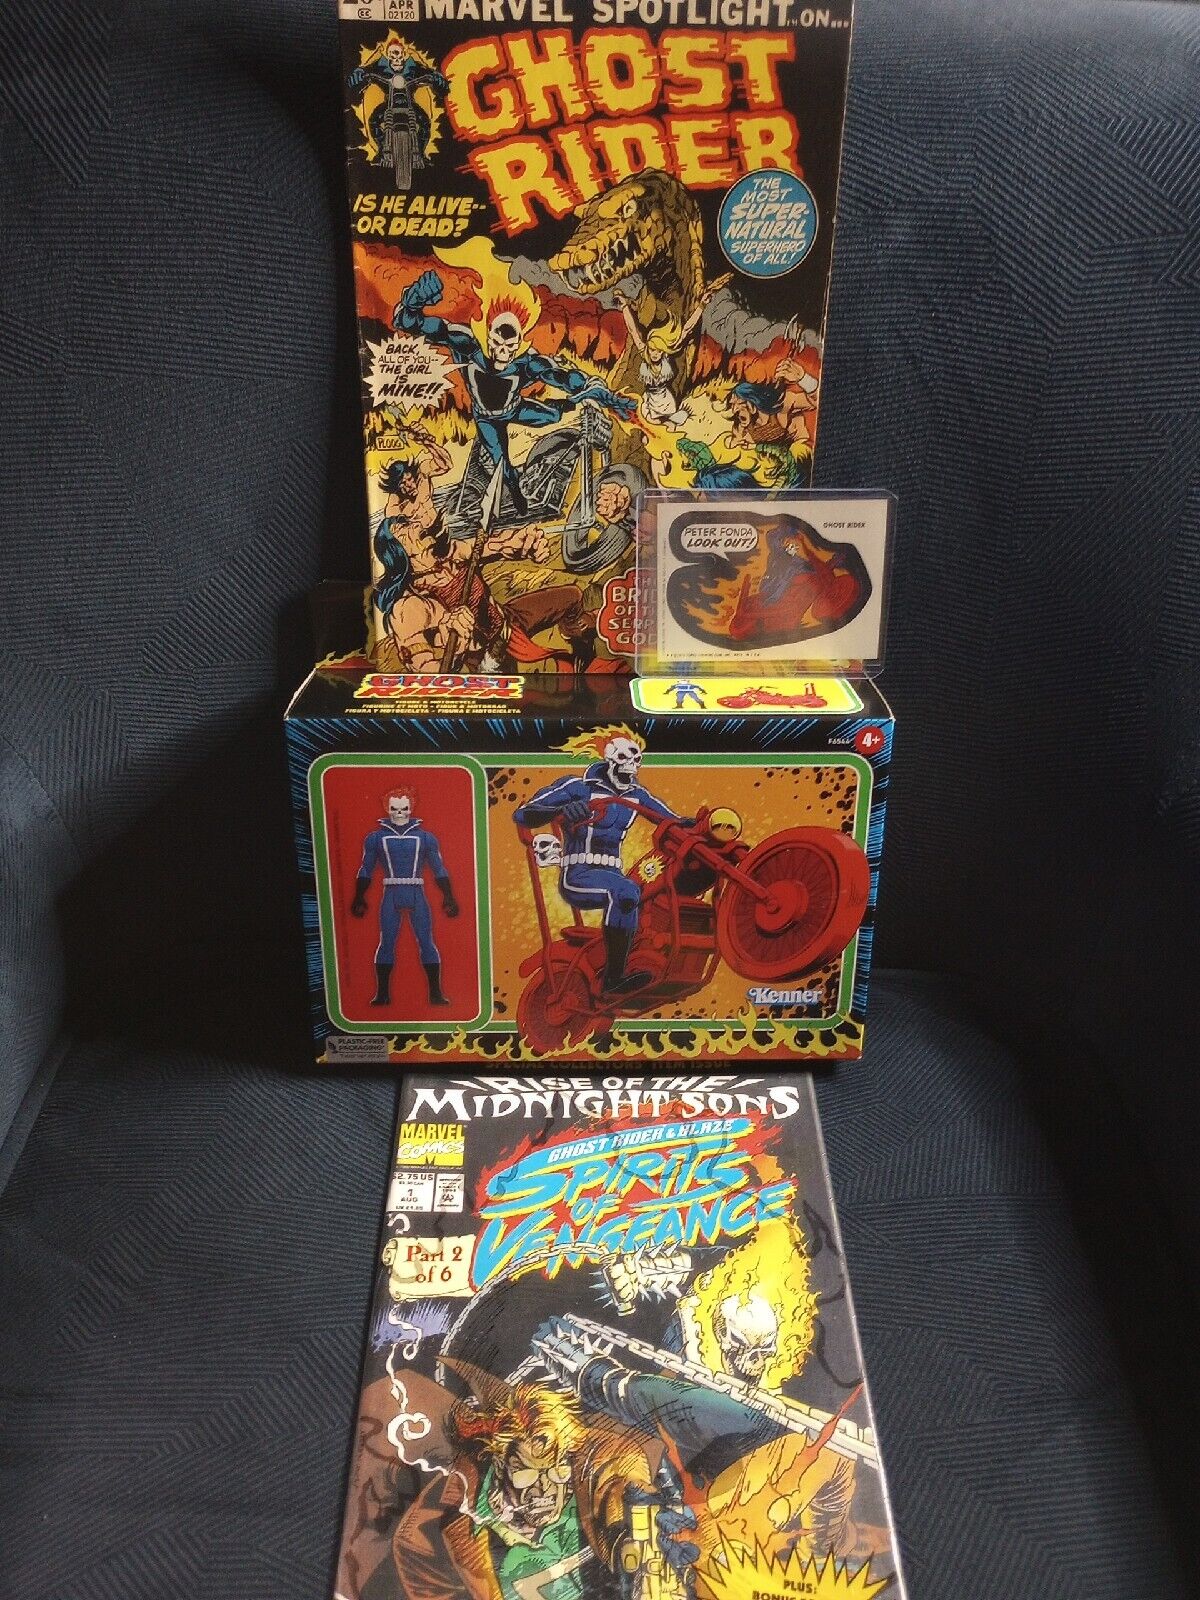 GHOST RIDER - (2) Comic Books + Action Figure + Vintage Trading Card Sticker